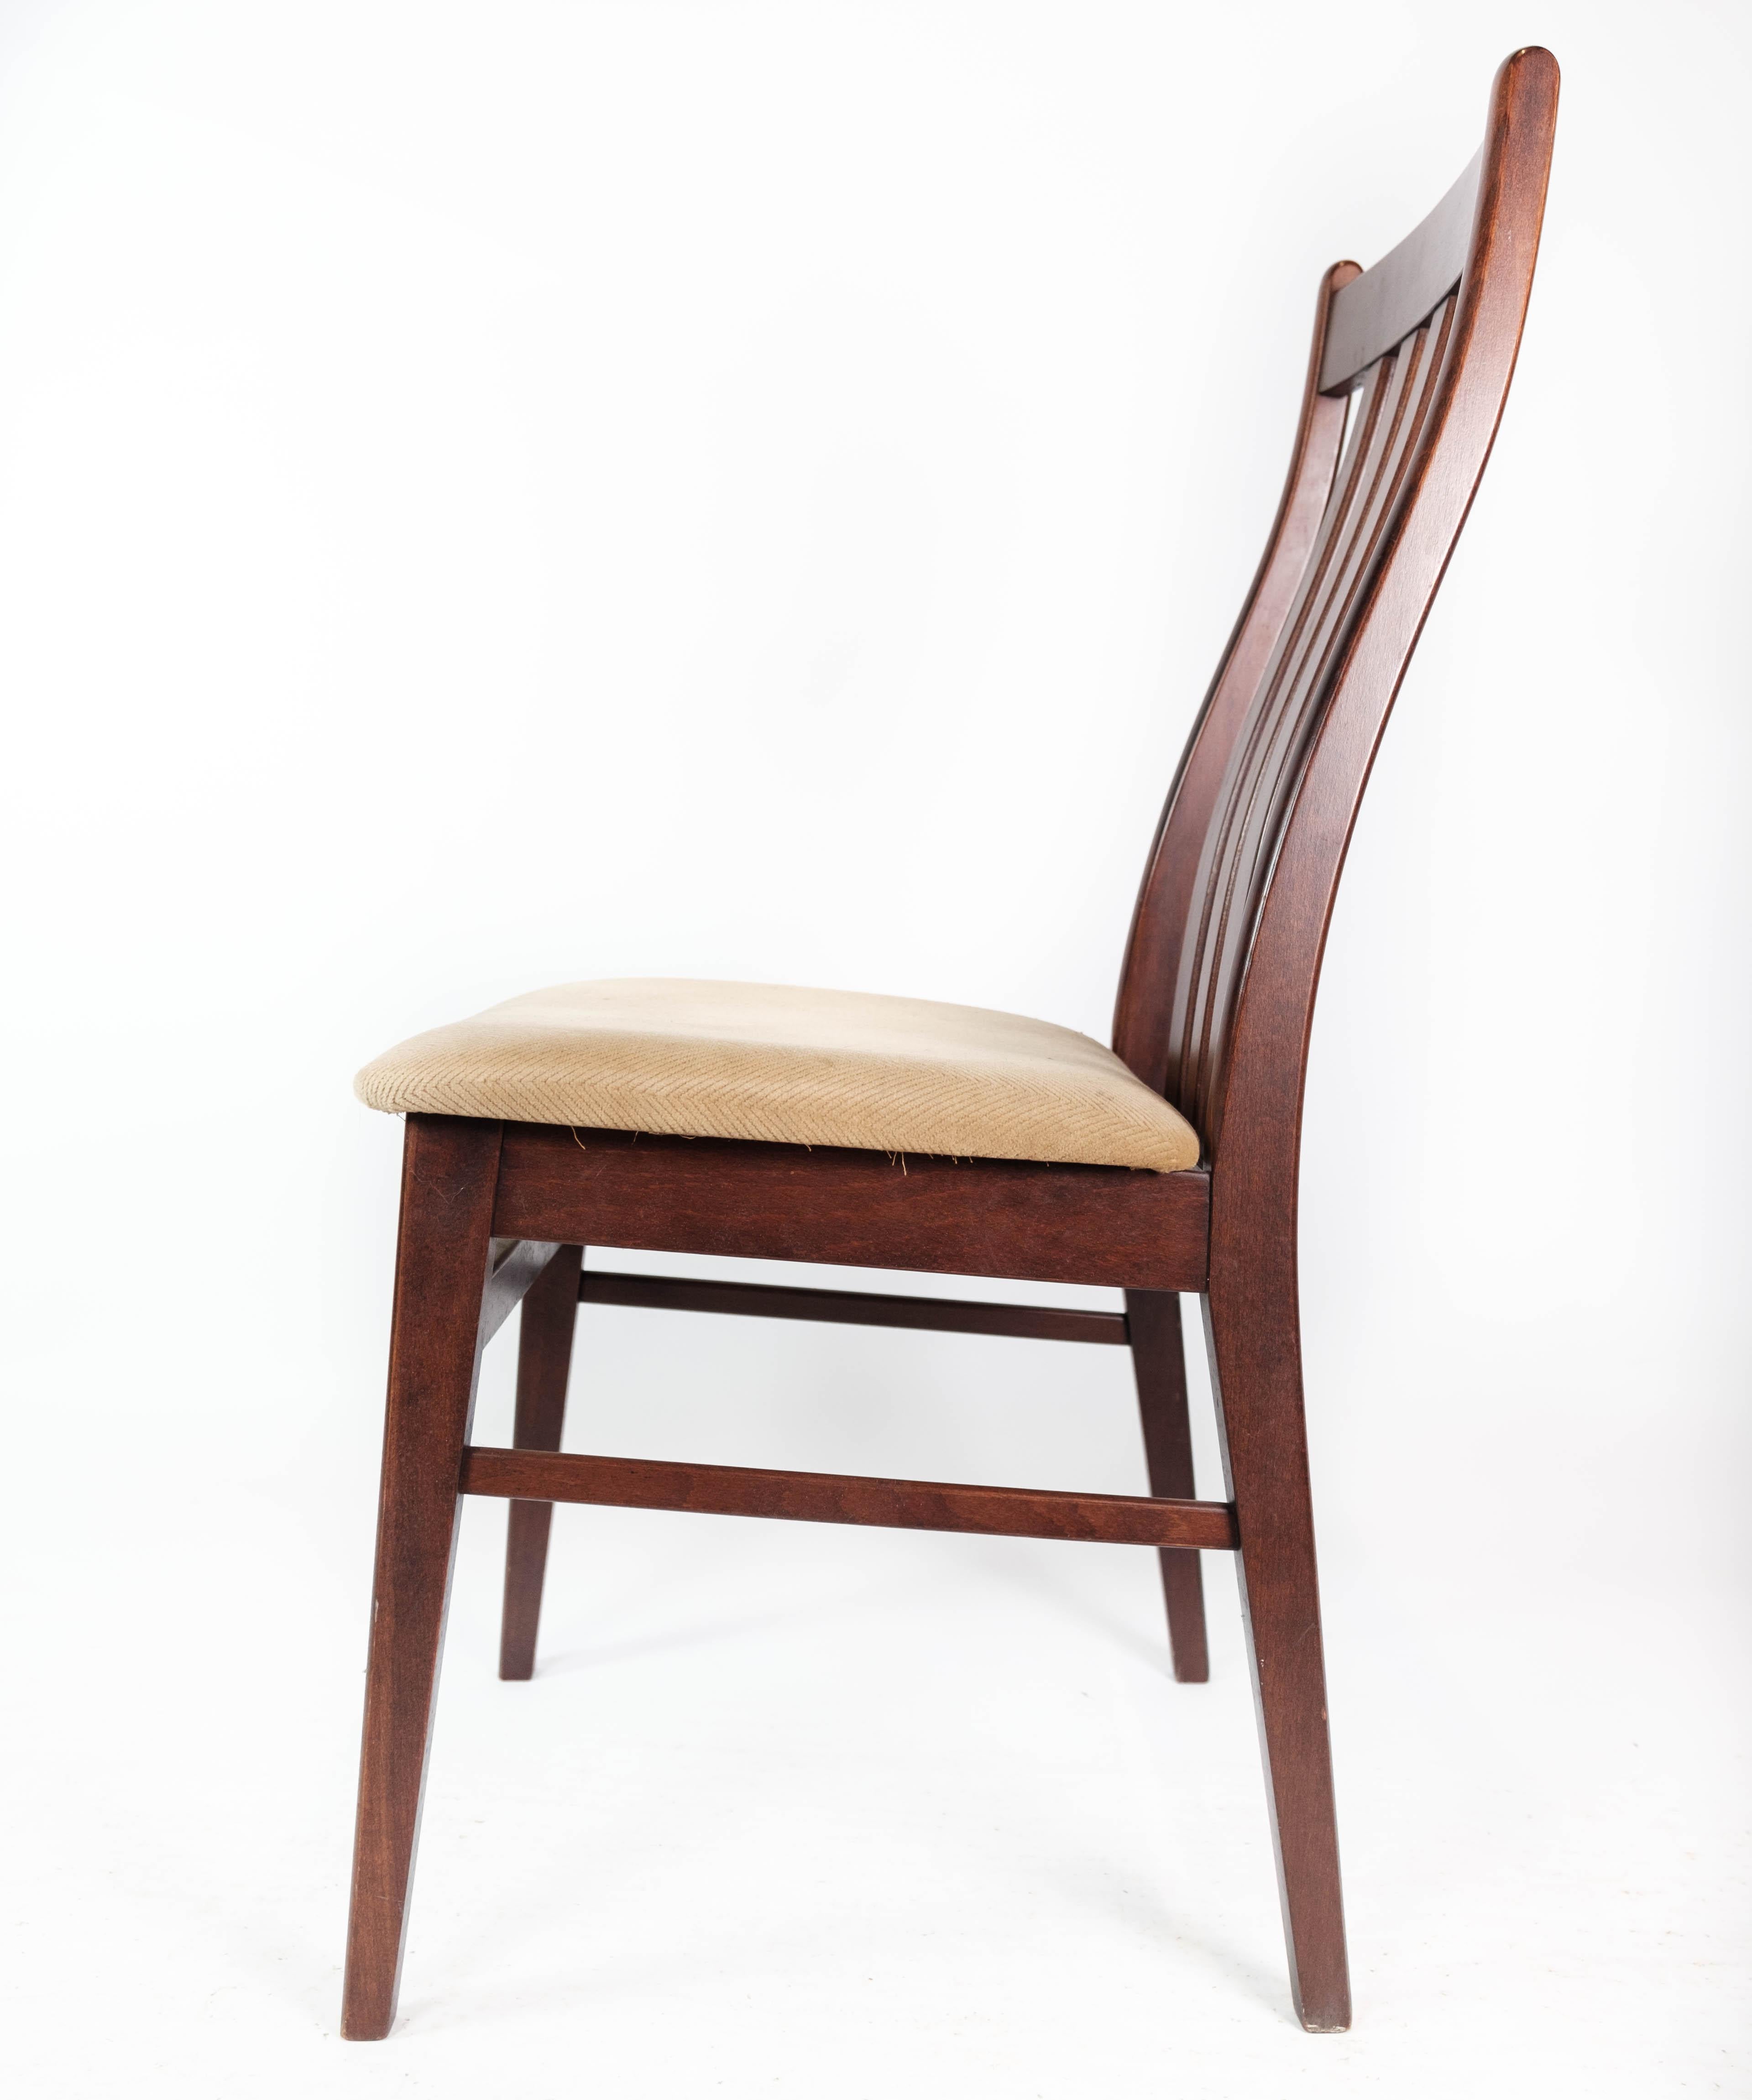 Set of Four Dining Room Chairs Made In Mahogany By Farstrup From 1960s For Sale 6